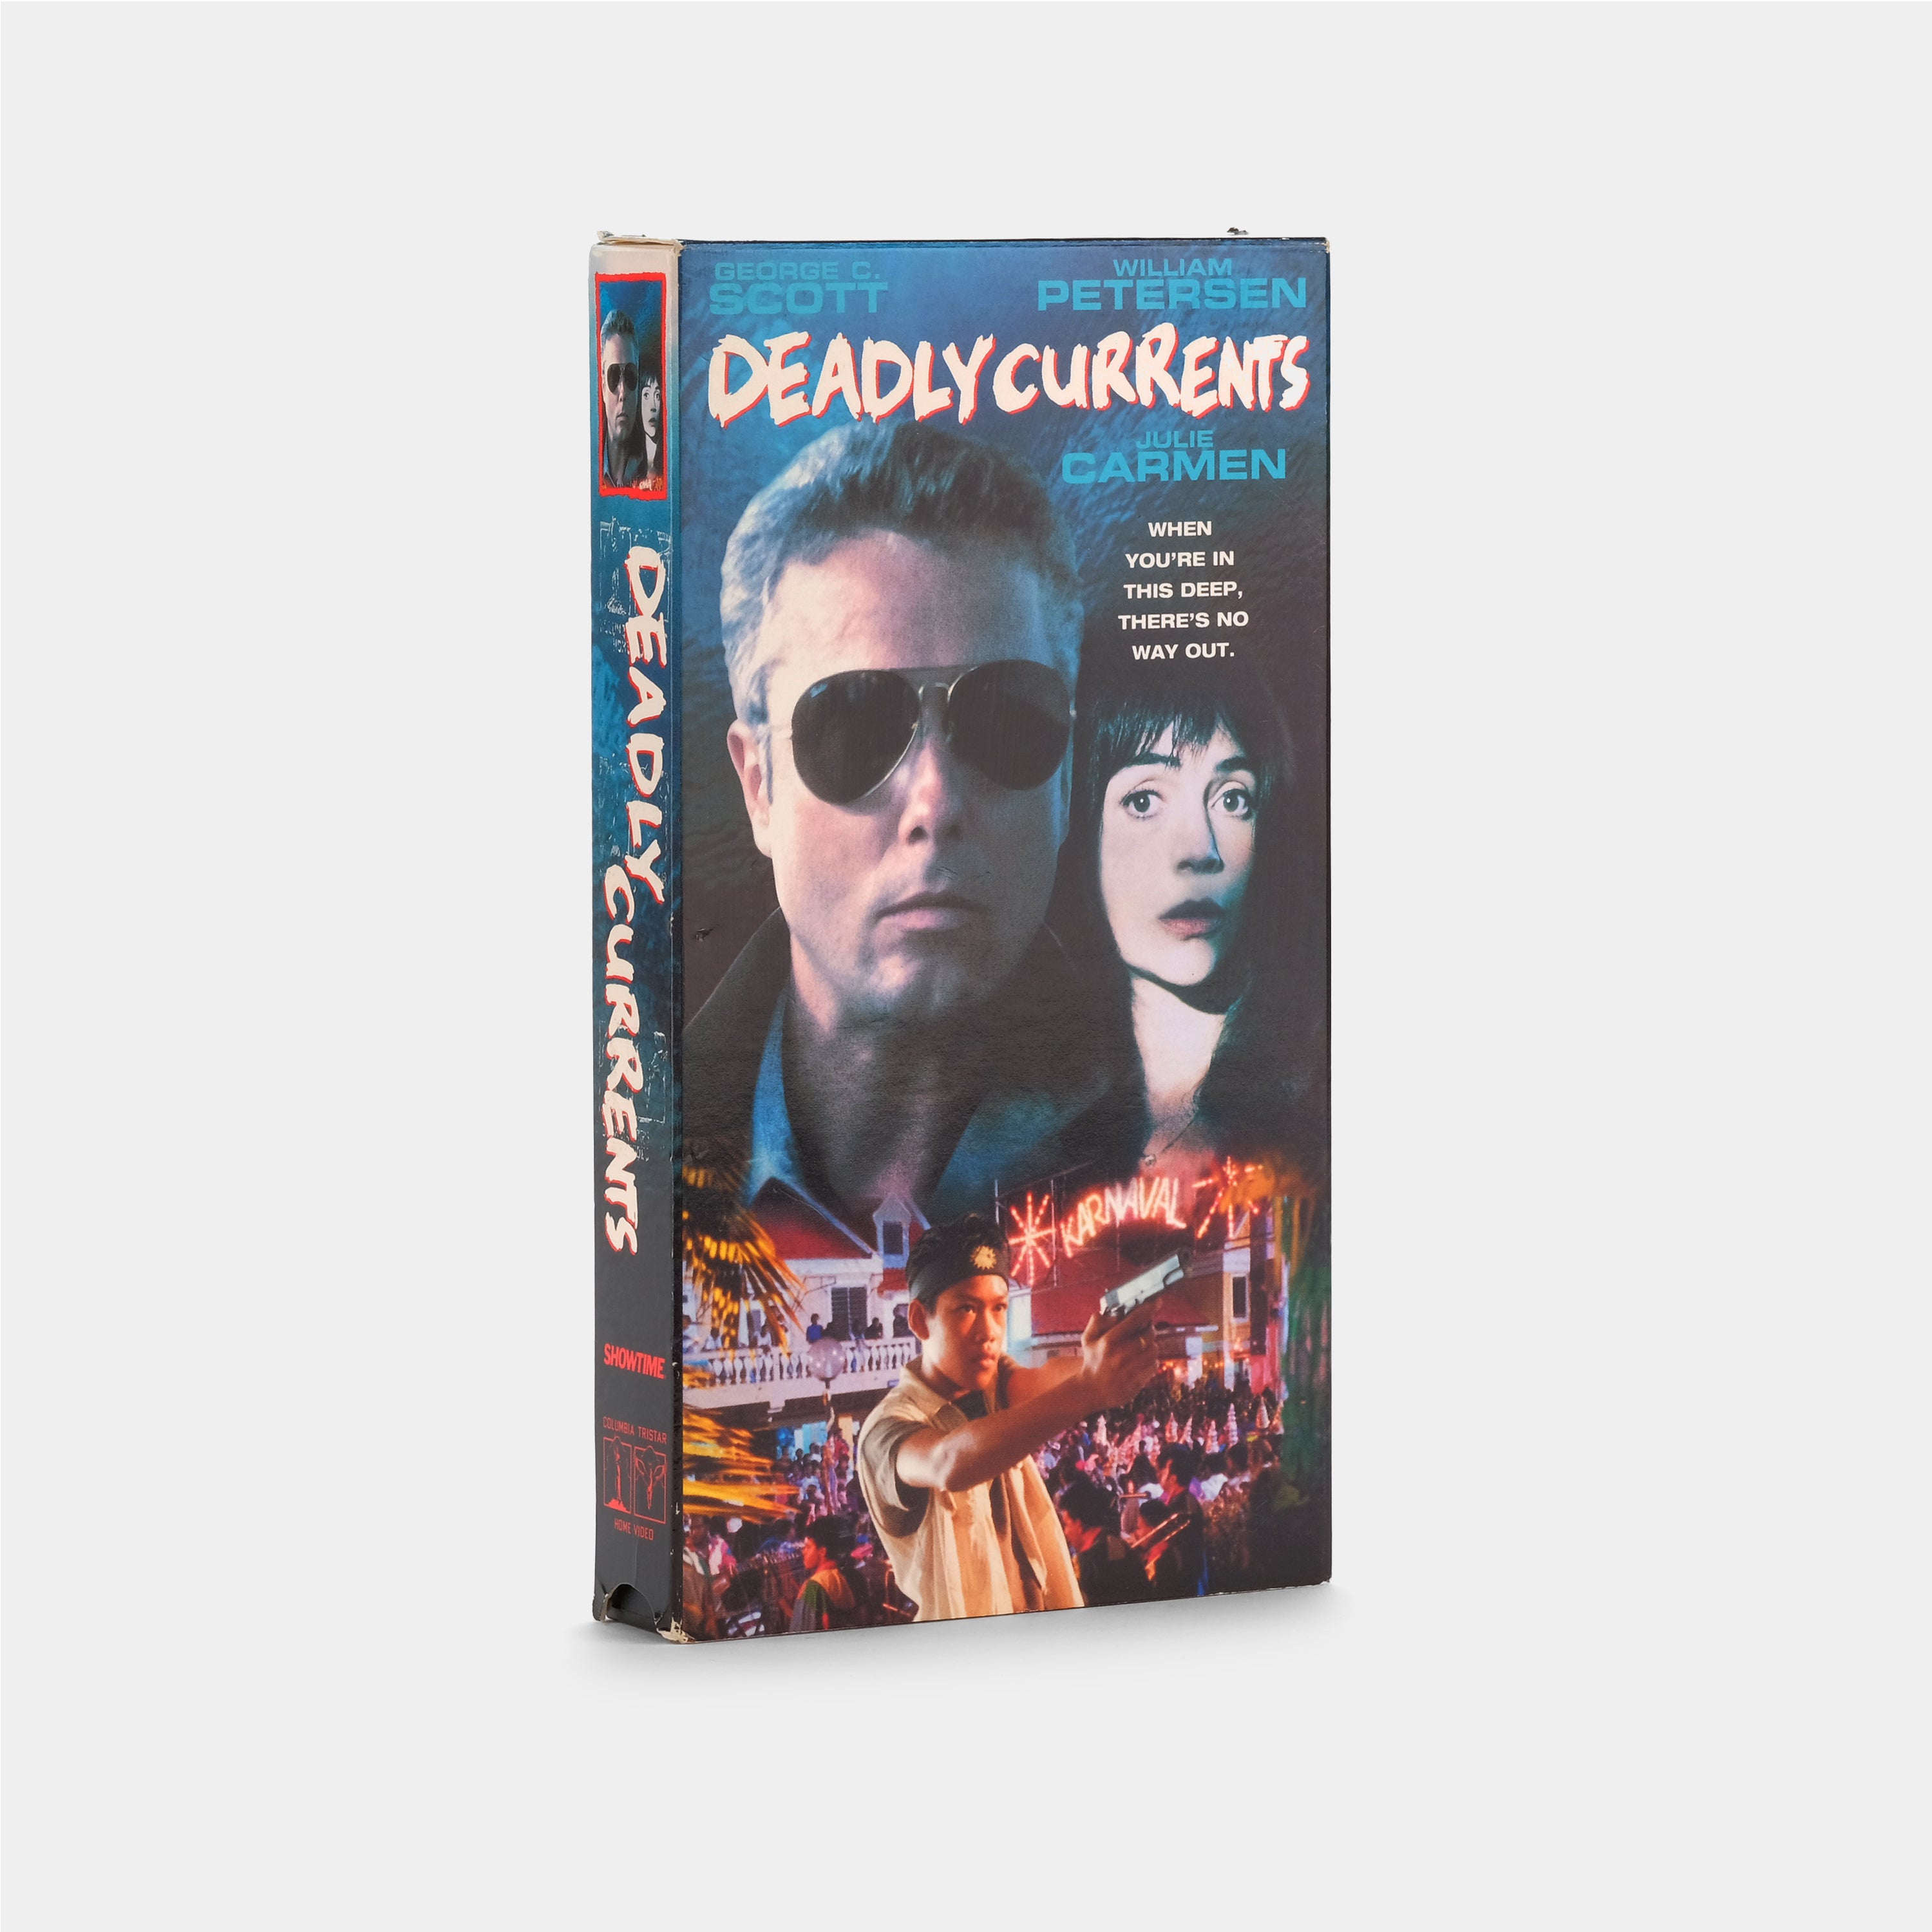 Deadly Currents VHS Tape